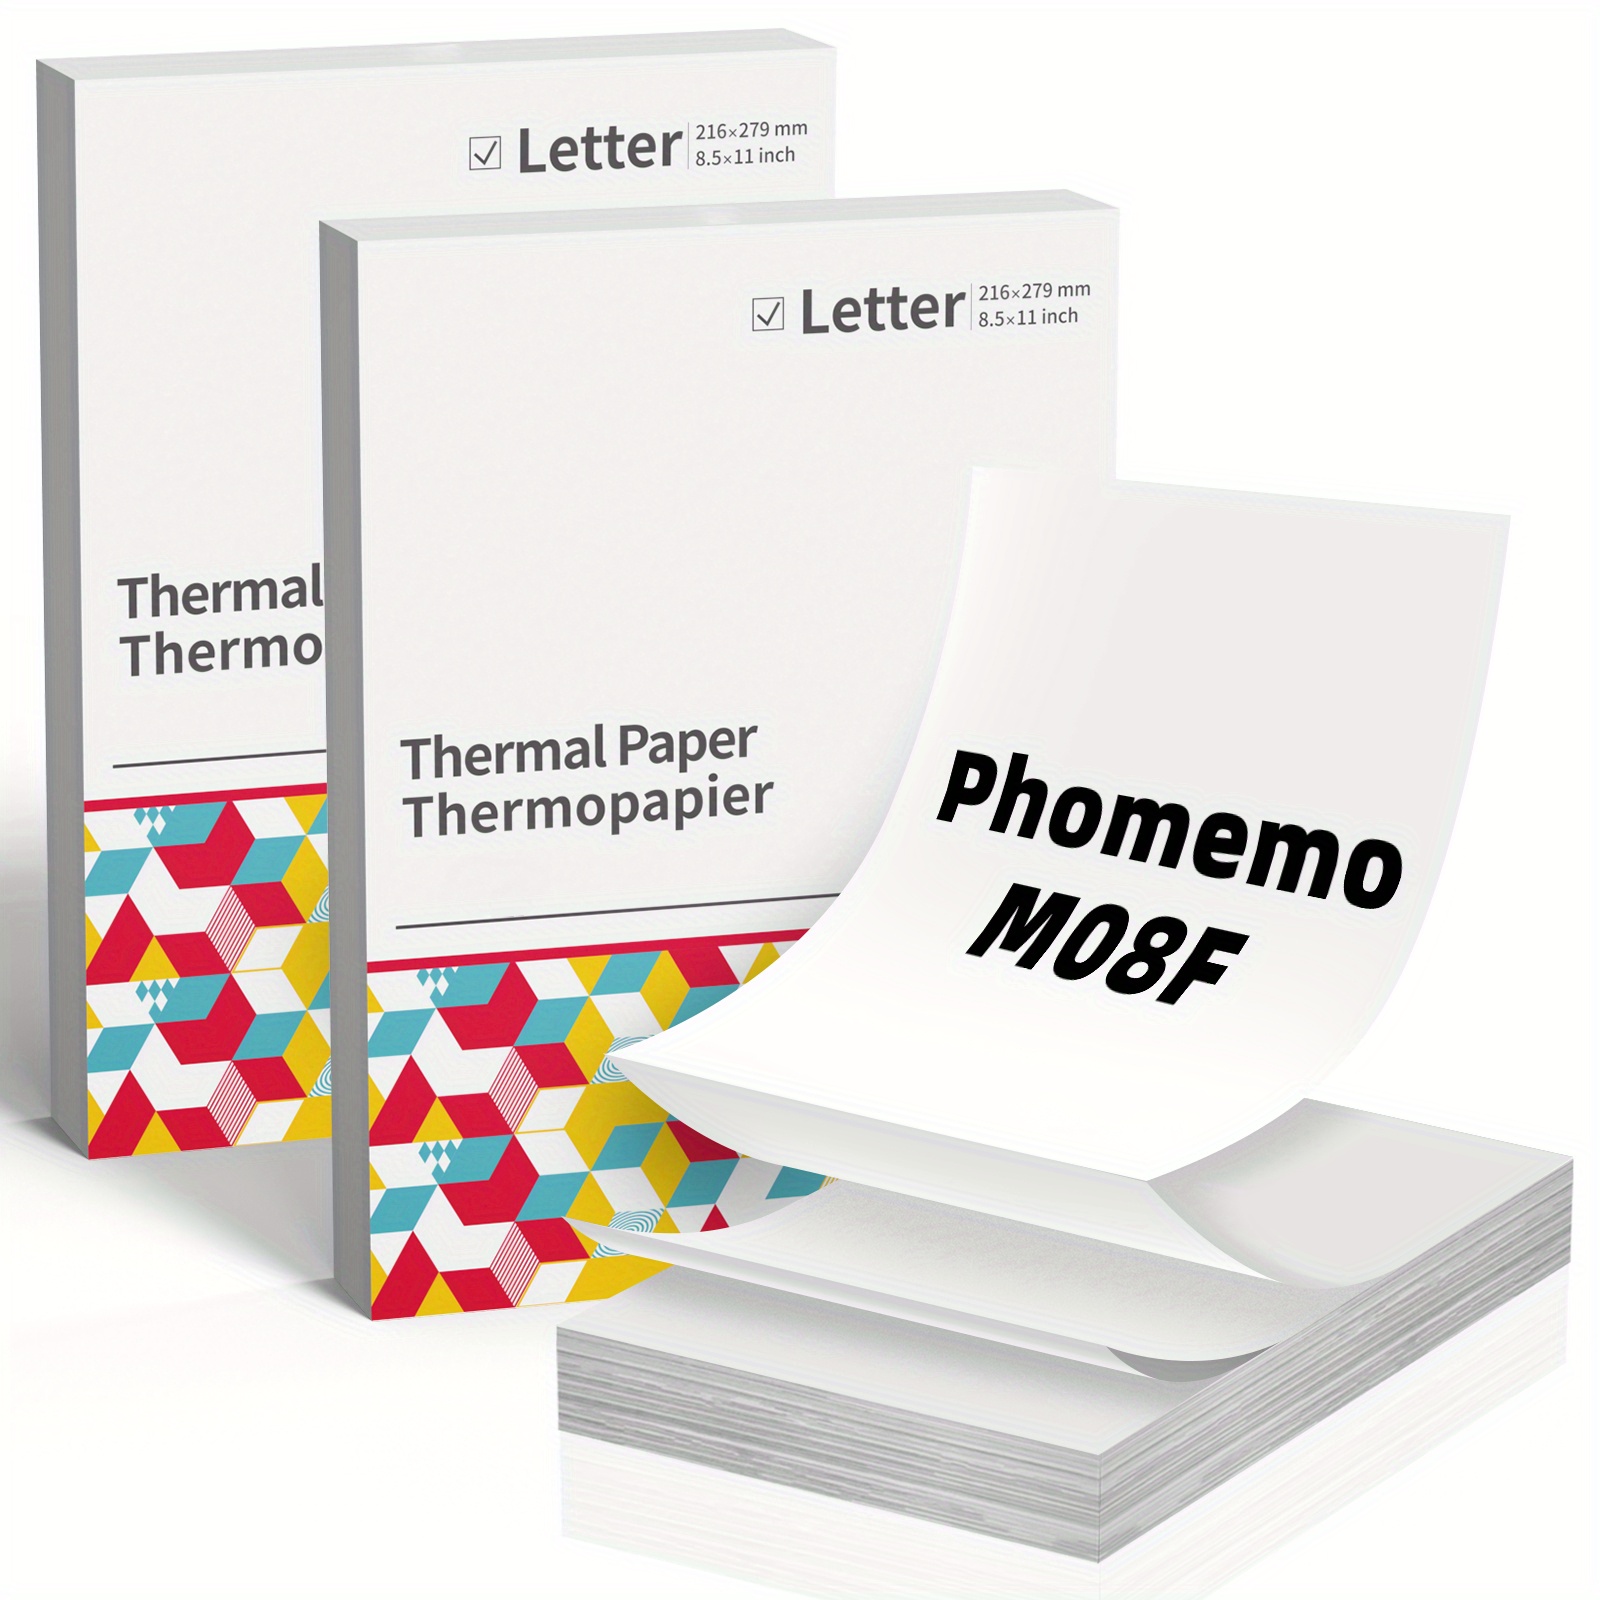 Thermal Printing Paper 8.5x11 - COLORWING Continuous Folding Paper  Compatible for HPRT MT800 MT800Q Phomemo M08F and Brother PJ762 PJ763MFi  Portable